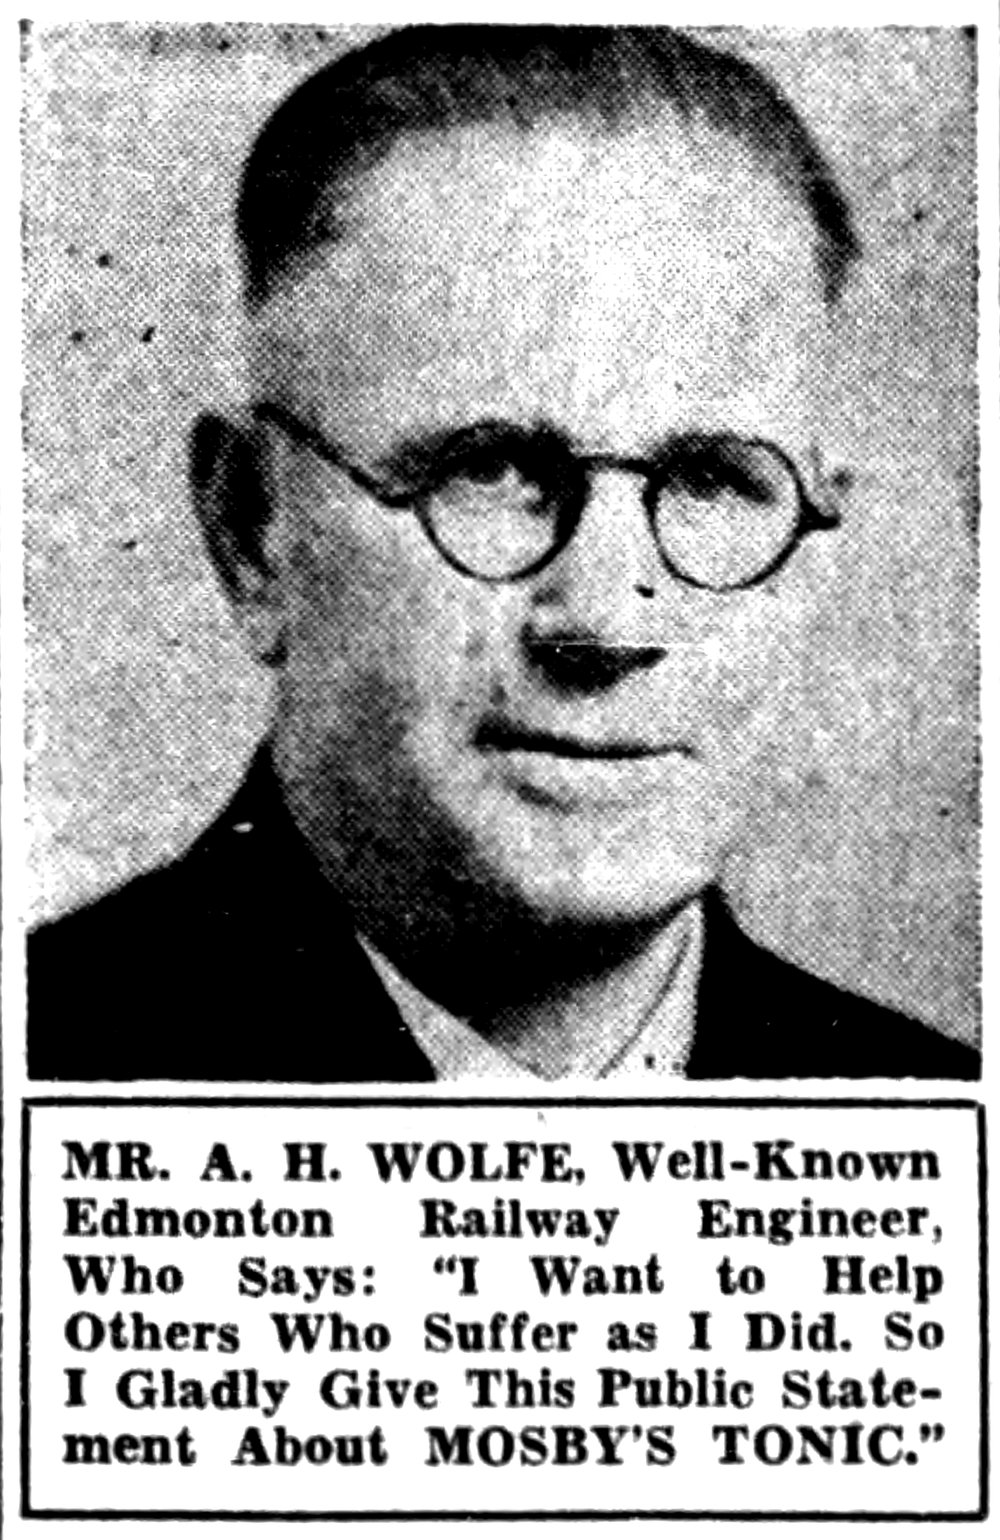  Albert H. Wolfe, featured in an advertisement for Mosby’s Tonic.   Edmonton Journal, November 29th, 1939.  